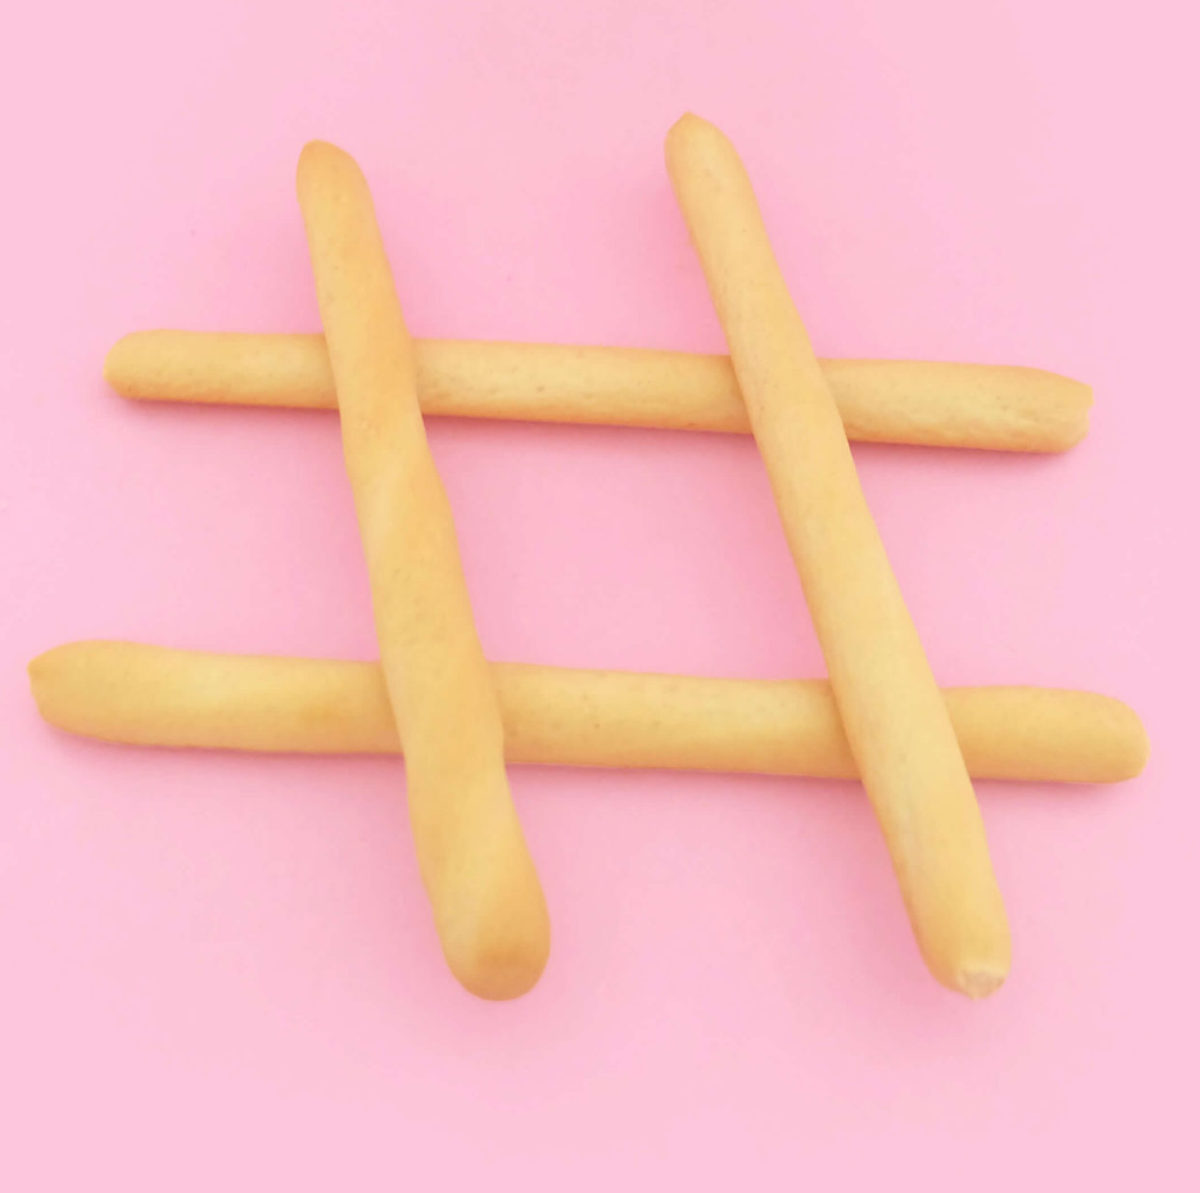 Hashtag made from bread sticks